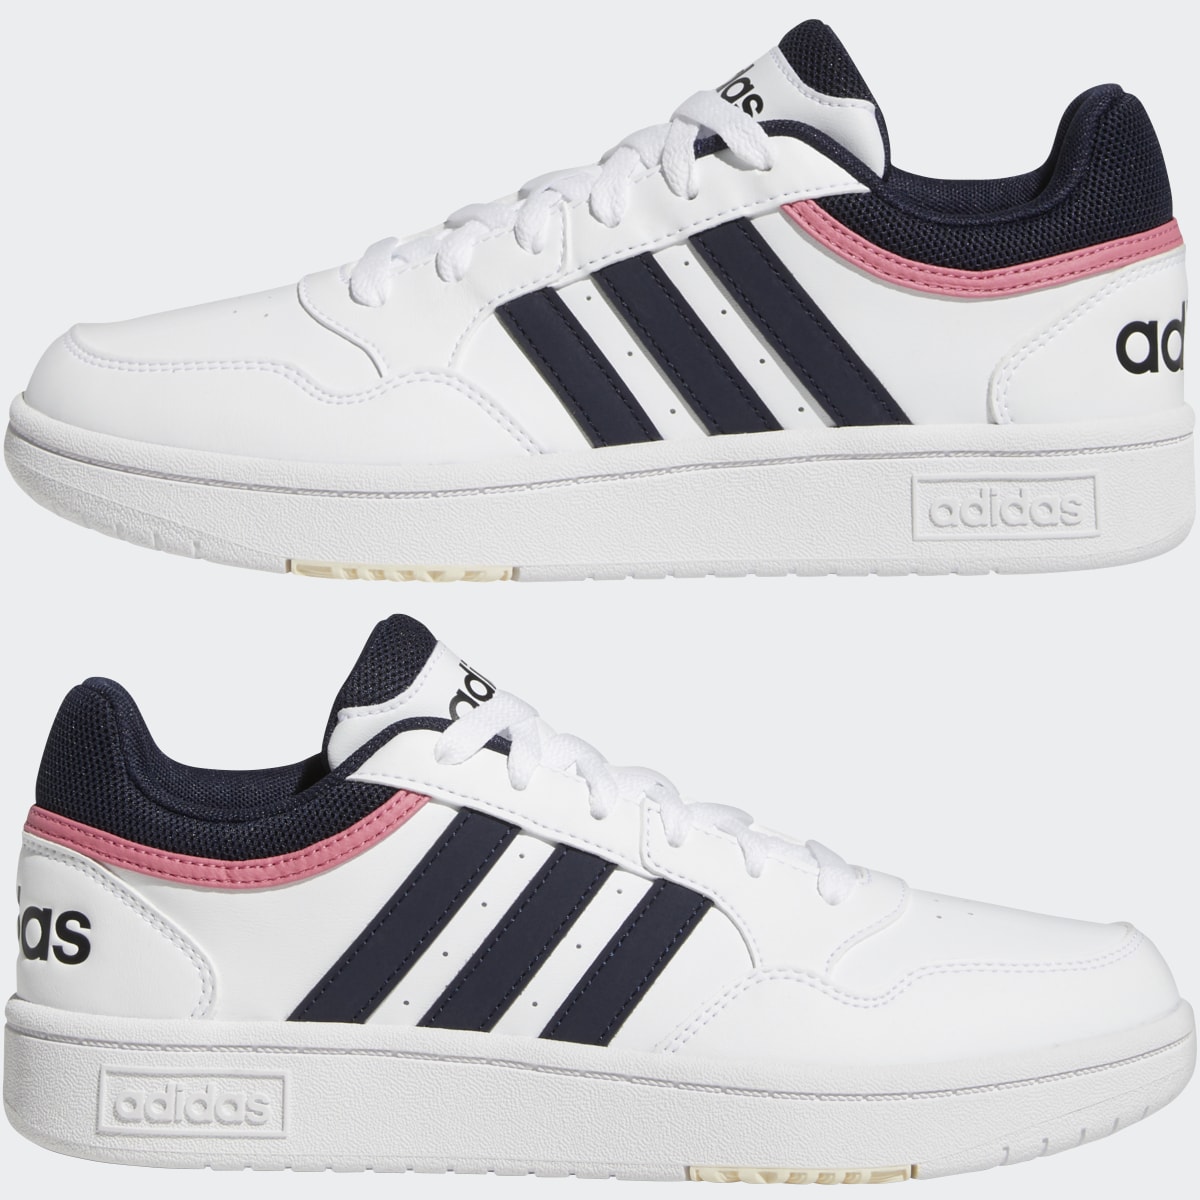 Adidas Hoops 3.0 Low Classic Shoes. 8